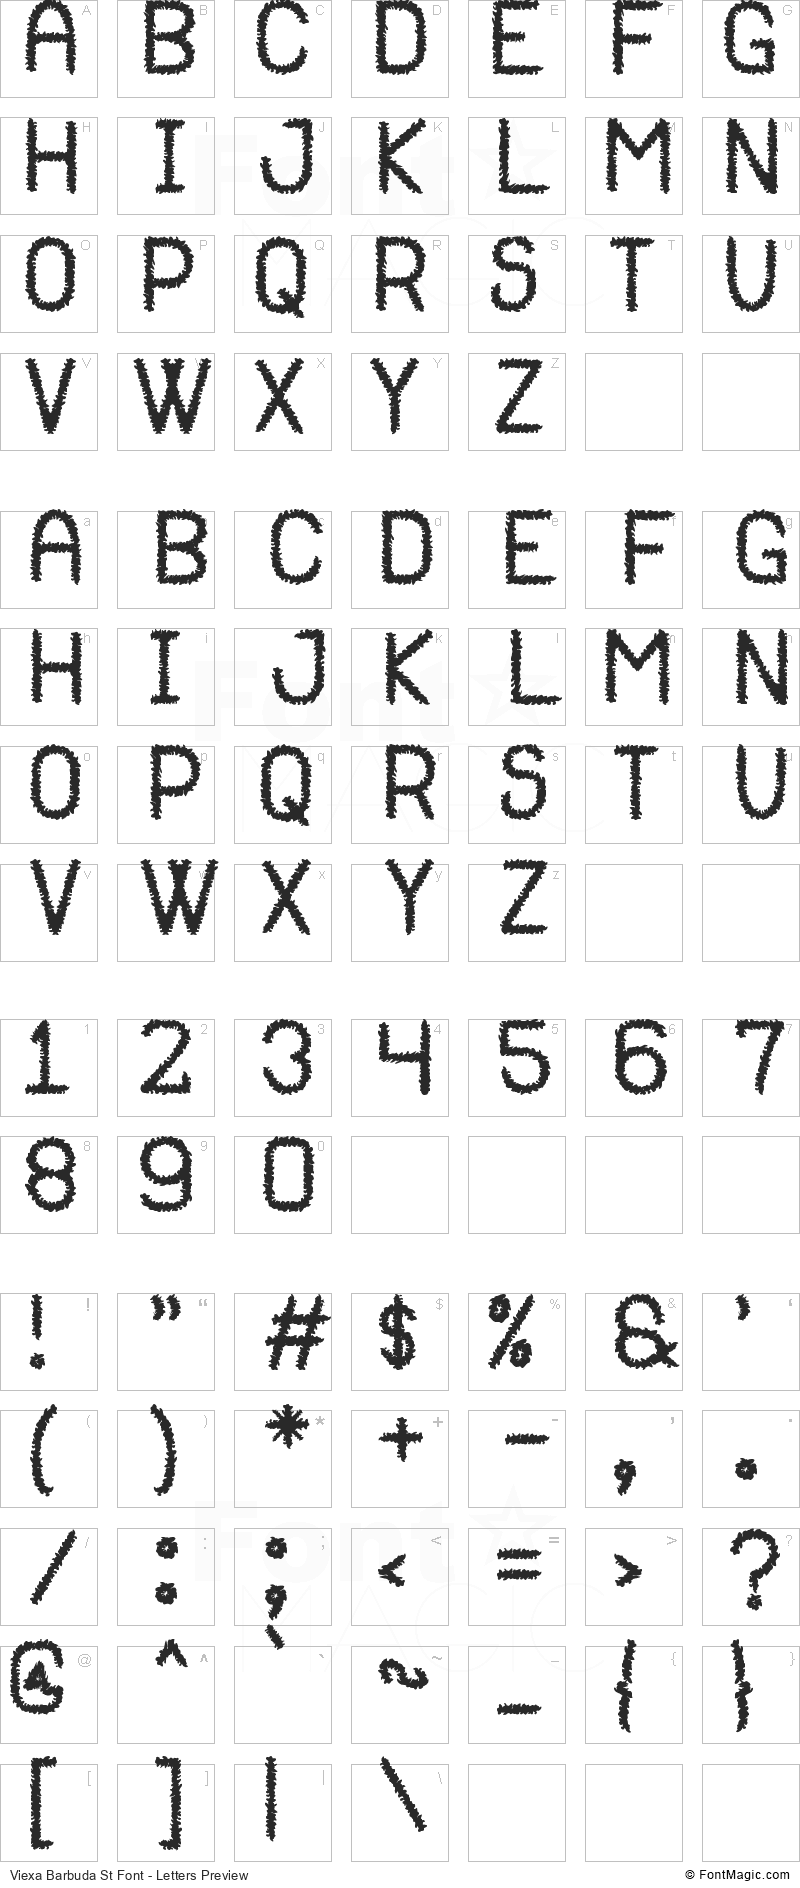 Viexa Barbuda St Font - All Latters Preview Chart